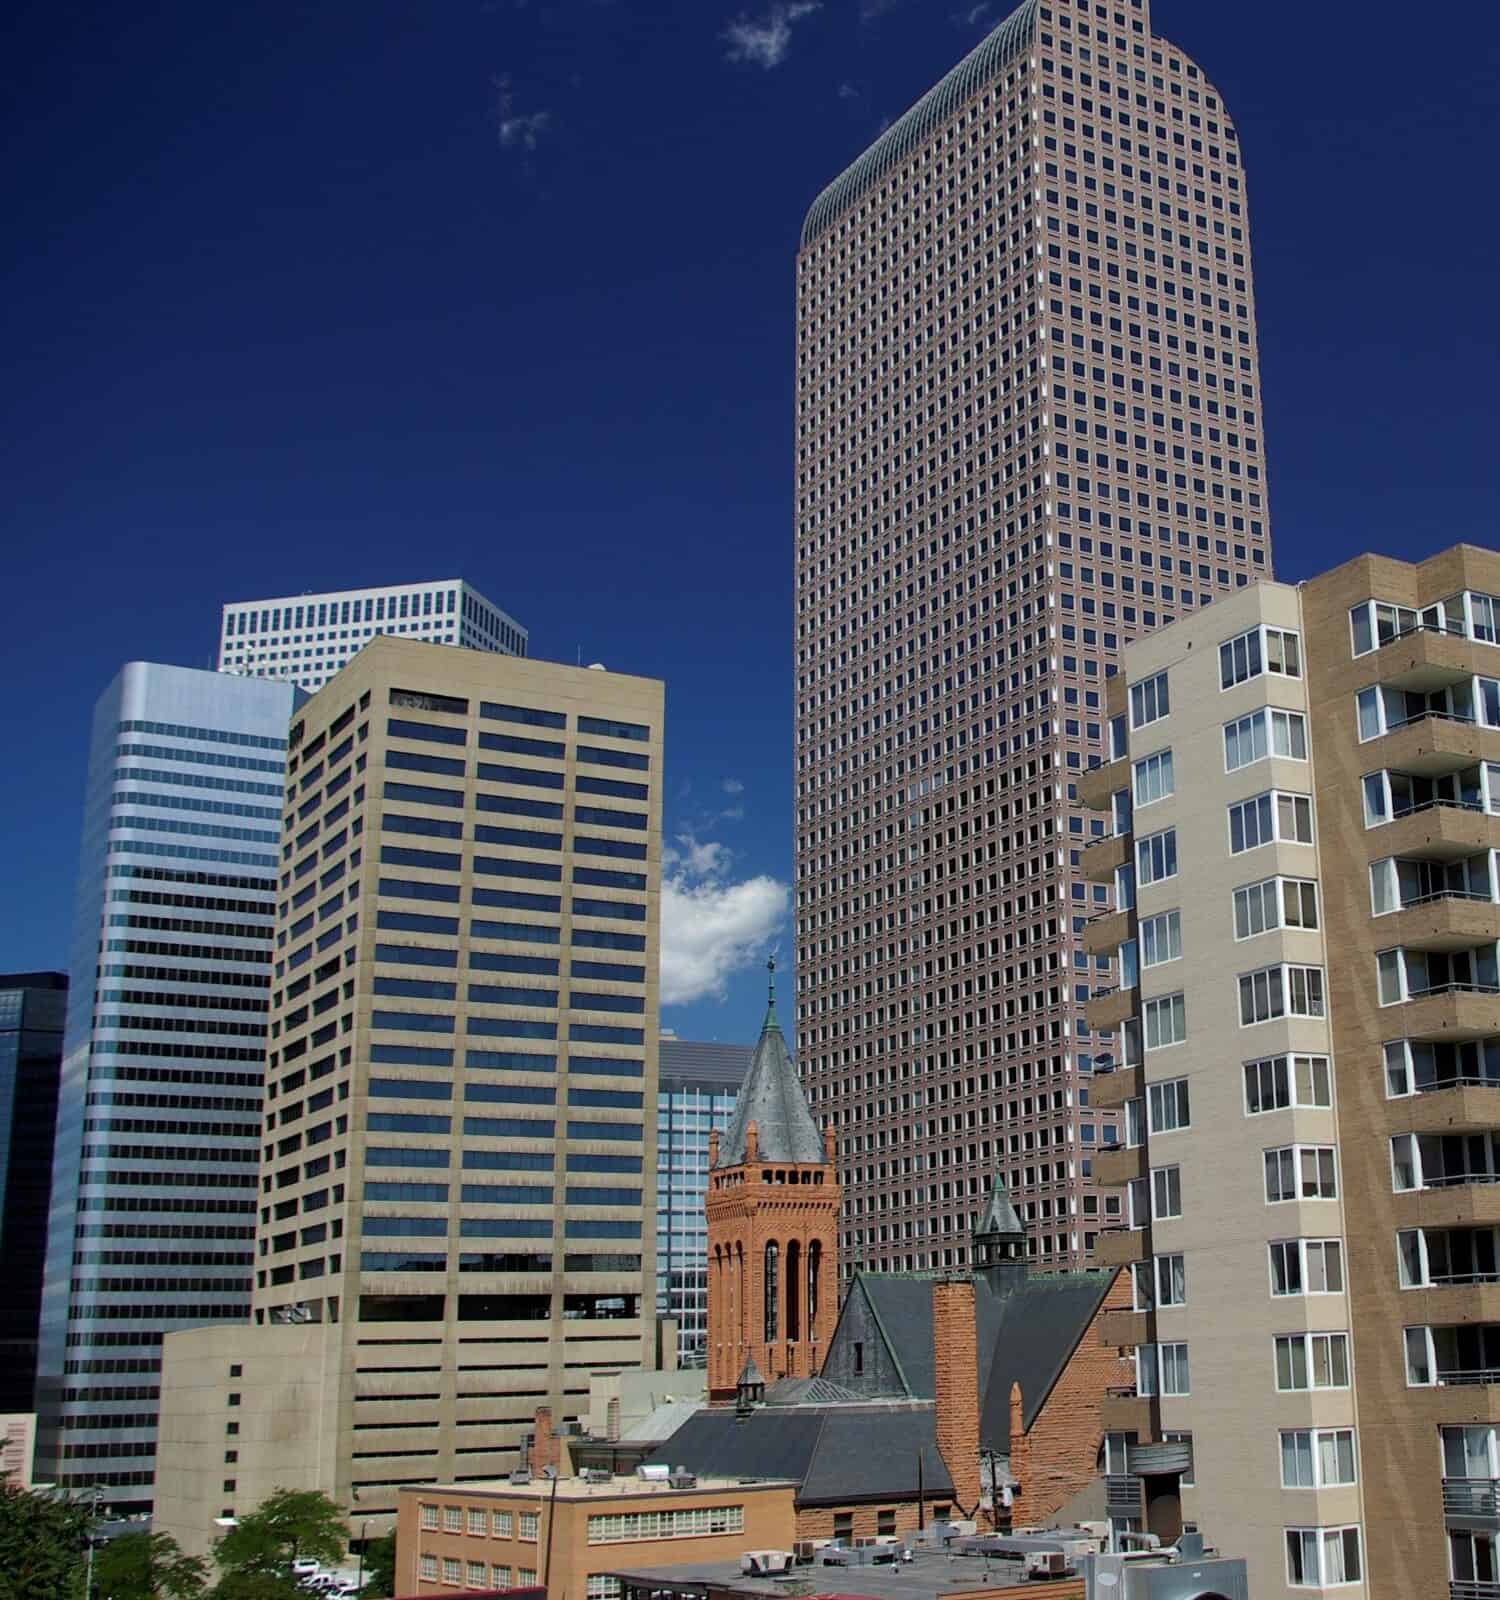 A cityscape of the Mile High City - Denver capturing the iconic Wells Fargo Center on a sunny and clear-sky day.